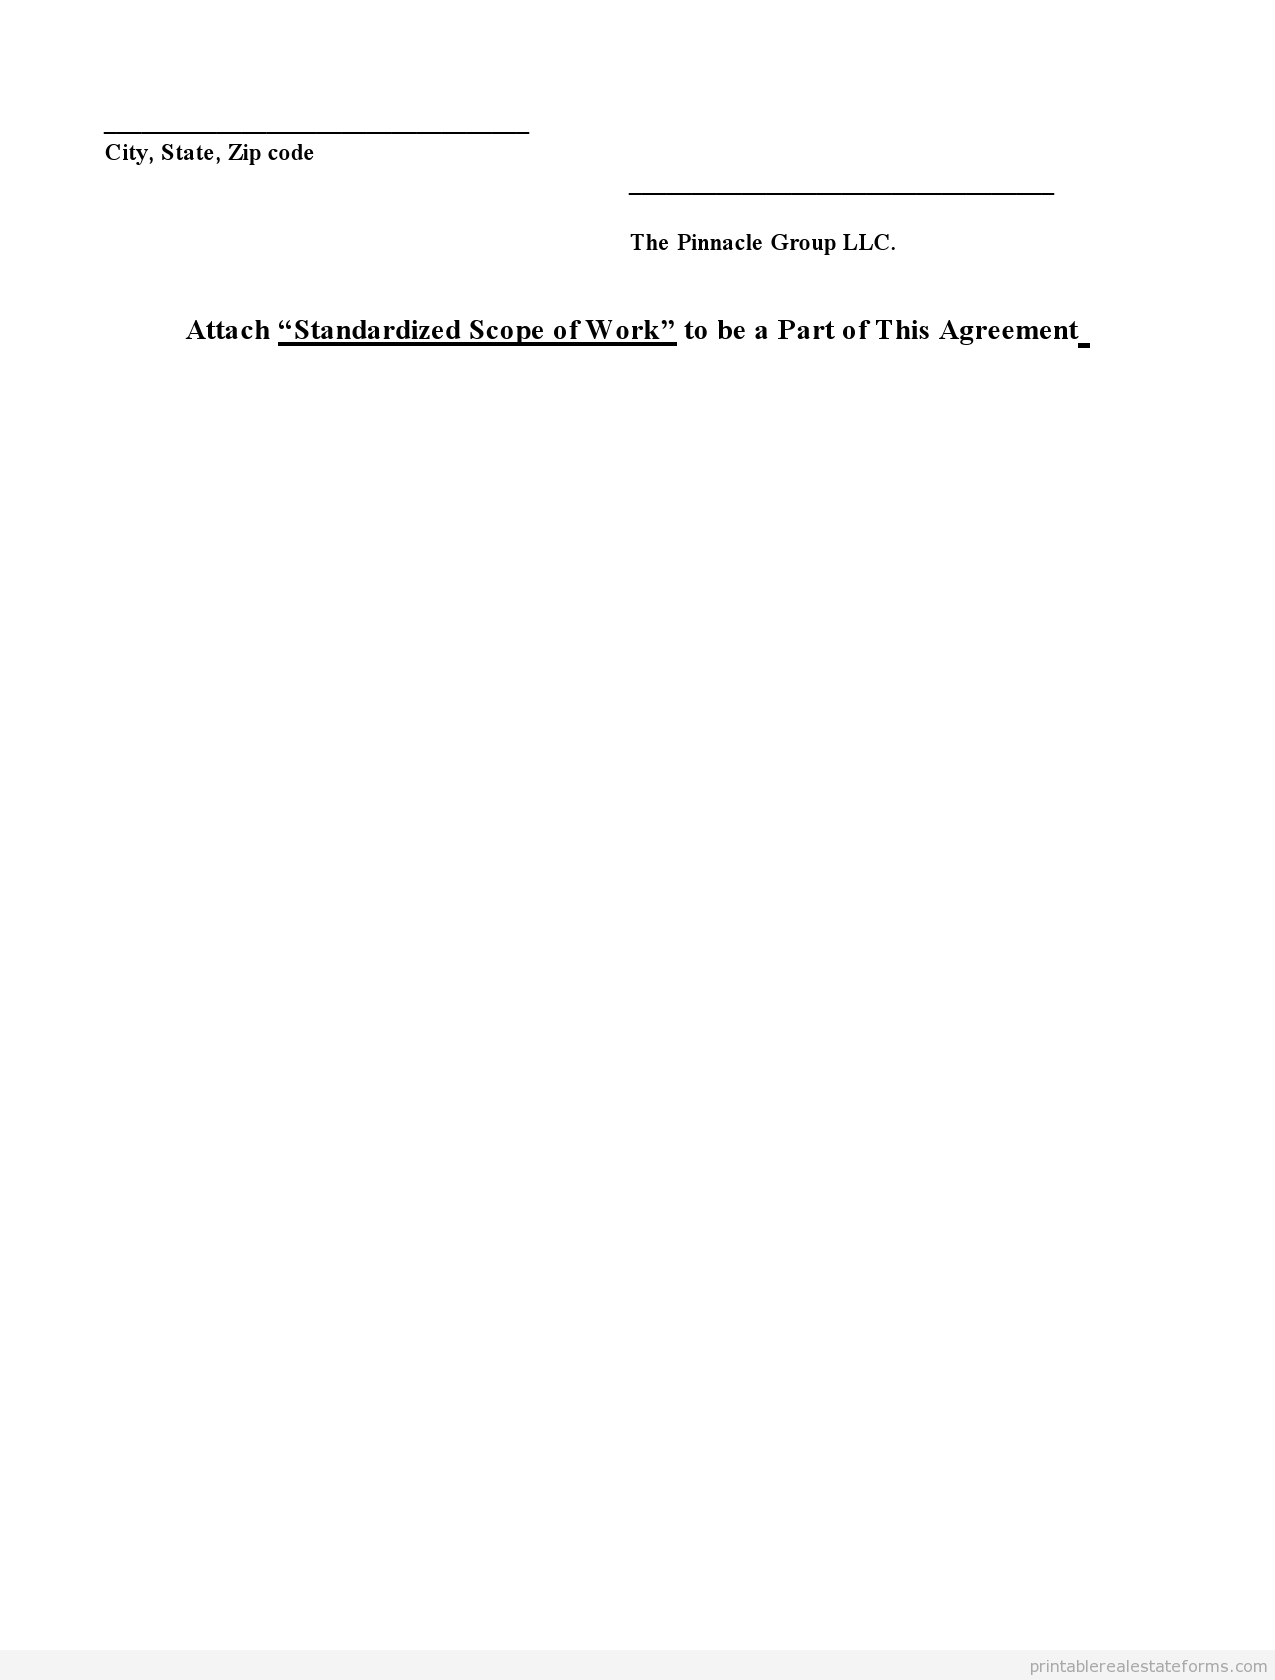 Sample Printable Subcontractor Agreement Form | Printable Real - Free Printable Subcontractor Agreement